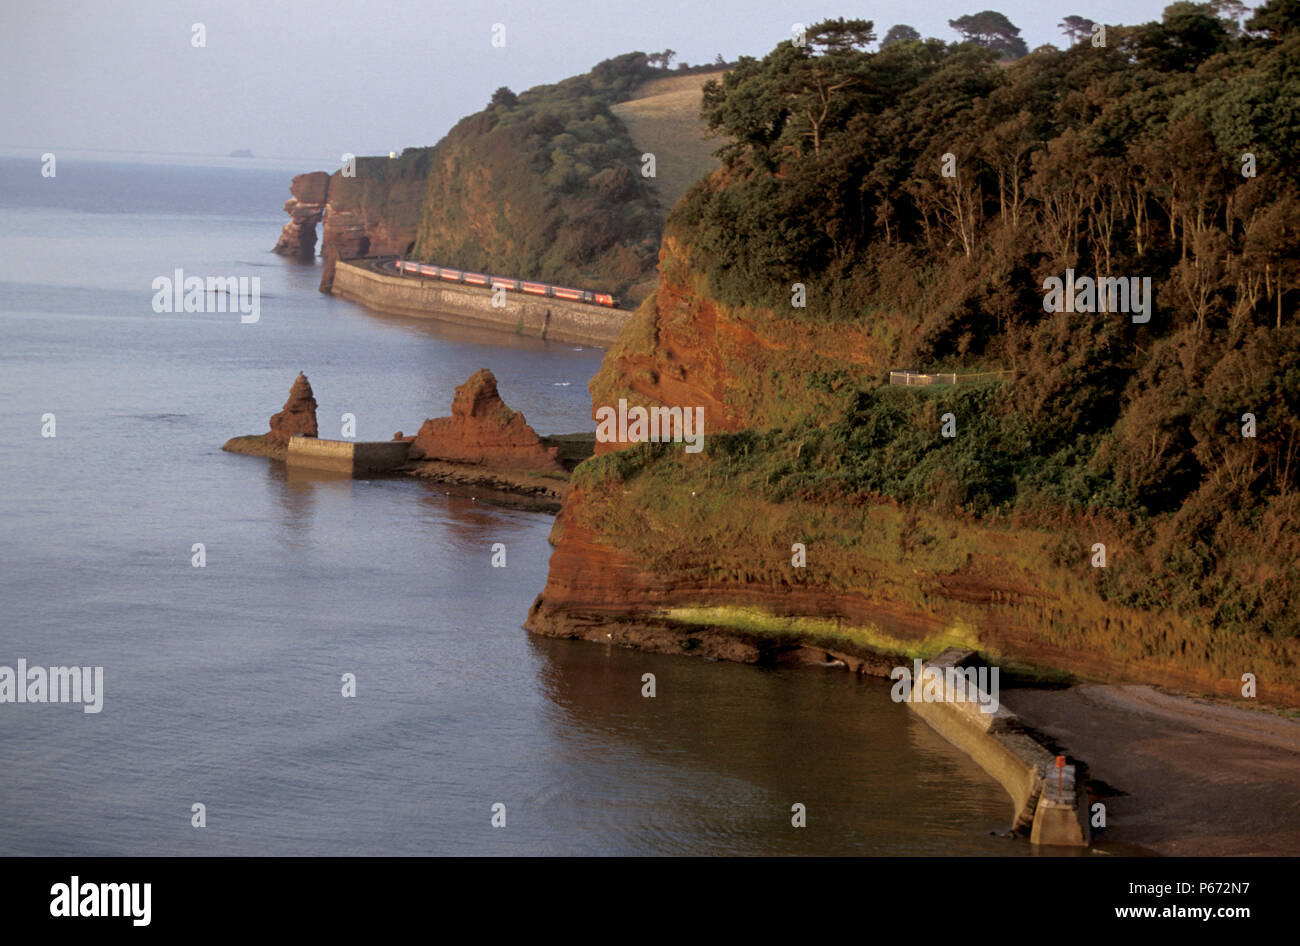 A Virgin Trains HST hugs the coast as it traverses the sea wall near to Dawlish in Devon with a CrossCountry service from Penzance. C2000 Stock Photo